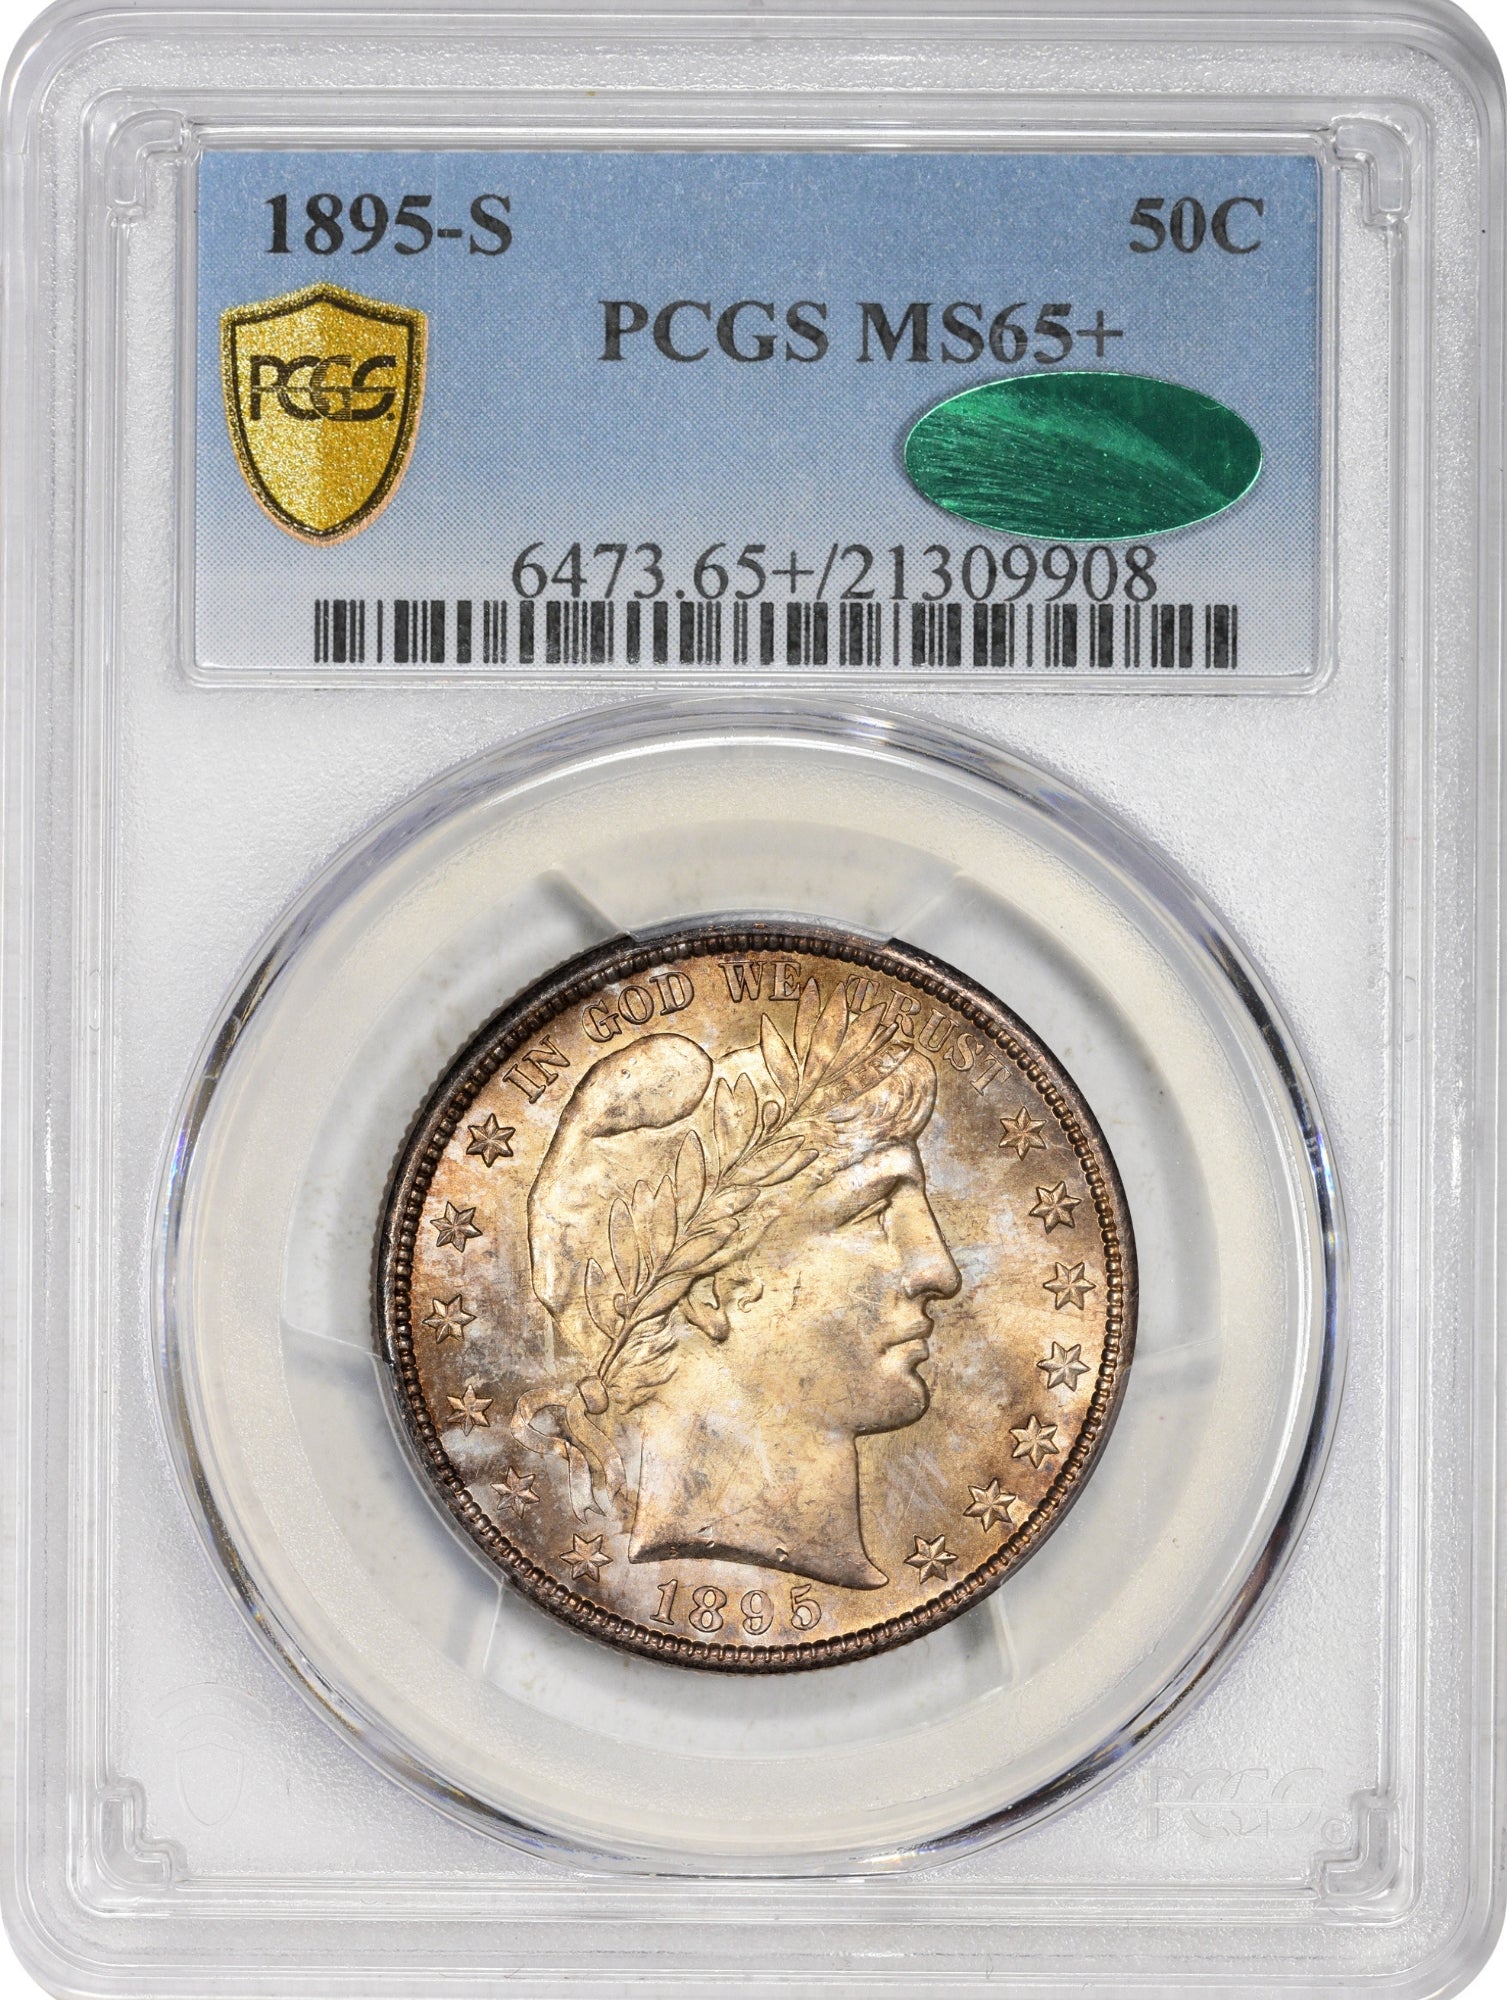 1895-S 50C MS65+ PCGS CAC - Paradime Coins | PCGS NGC CACG CAC Rare US Numismatic Coins For Sale